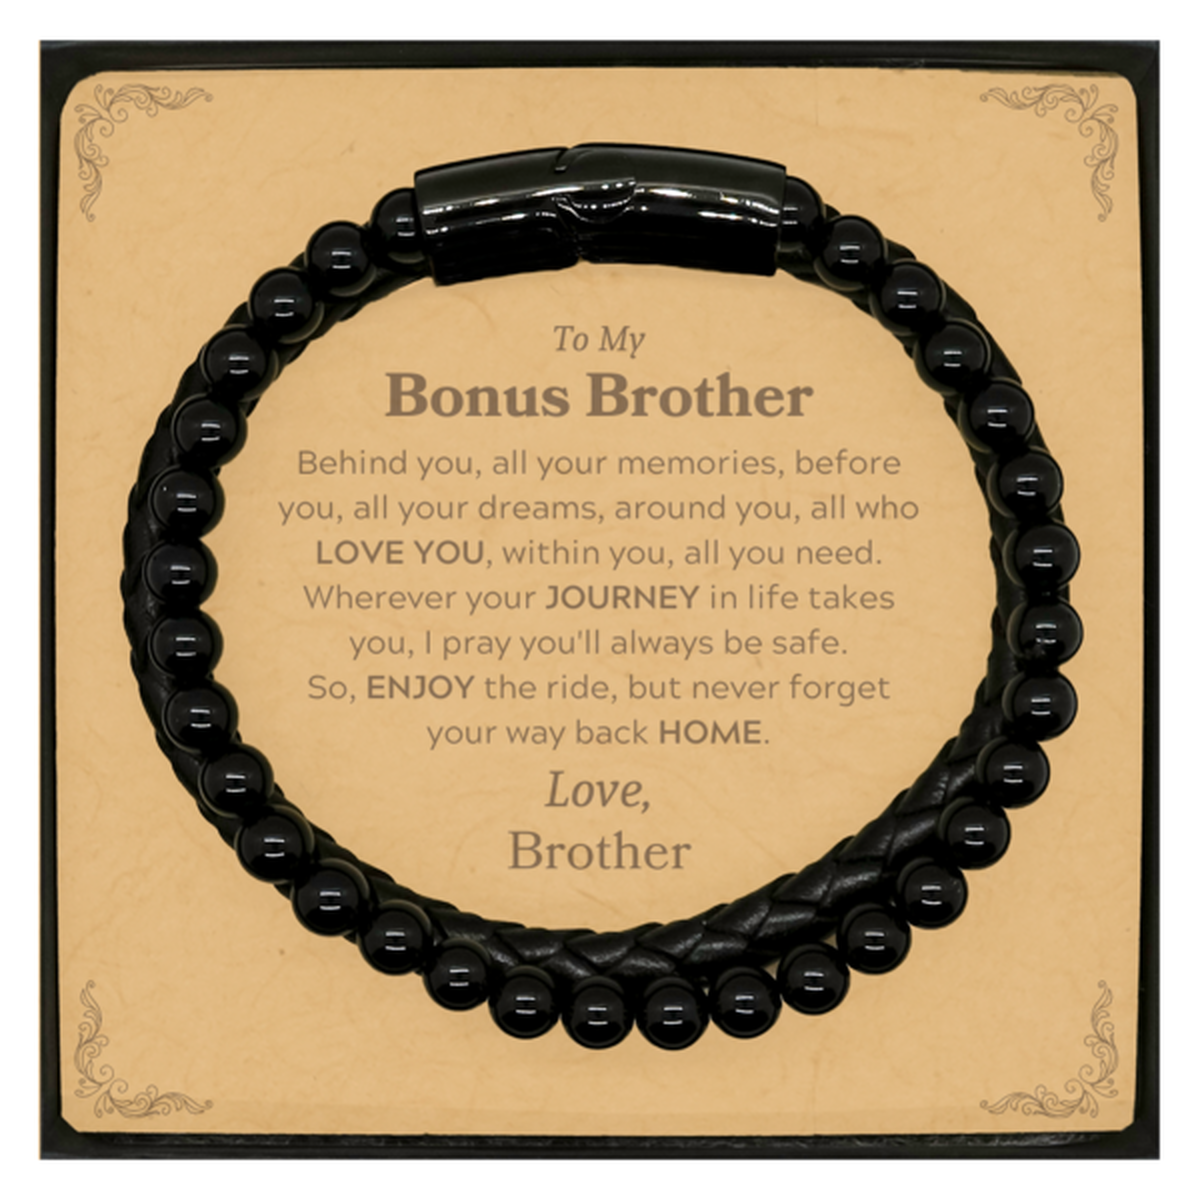 To My Bonus Brother Graduation Gifts from Brother, Bonus Brother Stone Leather Bracelets Christmas Birthday Gifts for Bonus Brother Behind you, all your memories, before you, all your dreams. Love, Brother